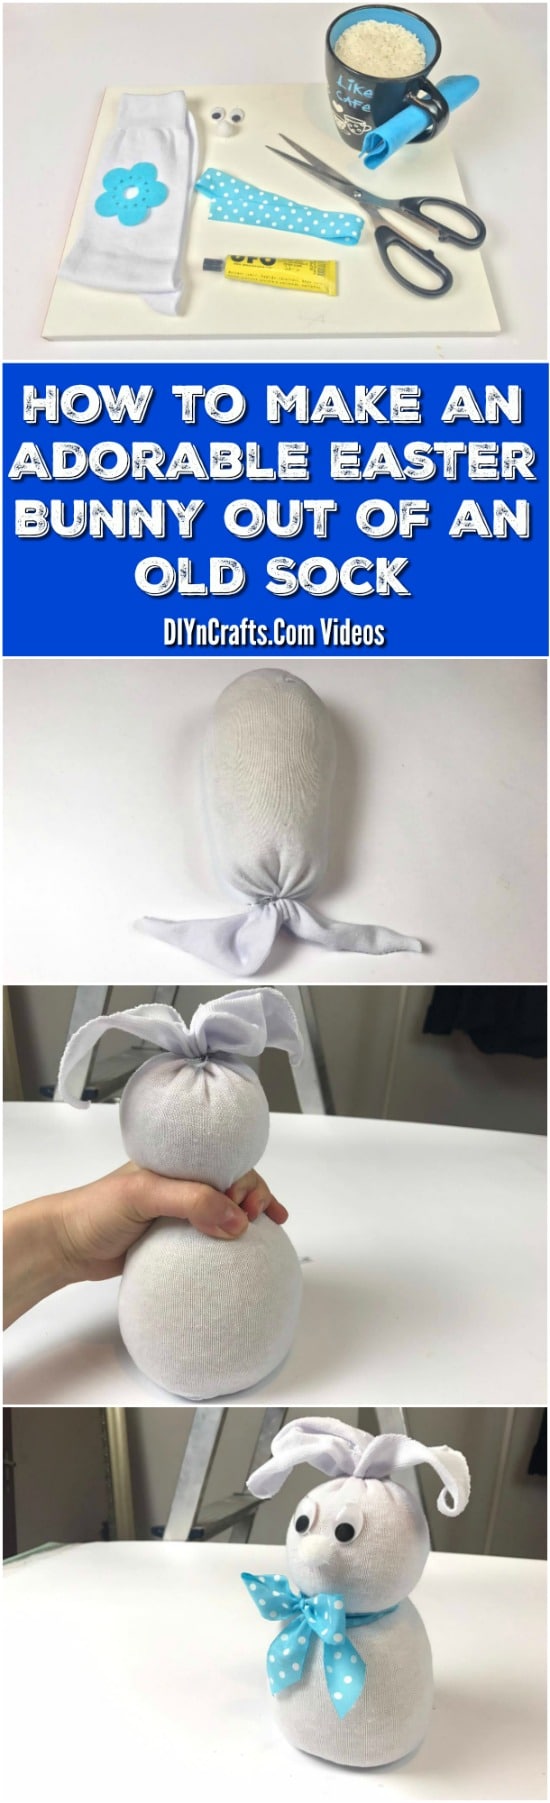 How to Make an Adorable Easter Bunny Out of an Old Sock {Video tutorial}